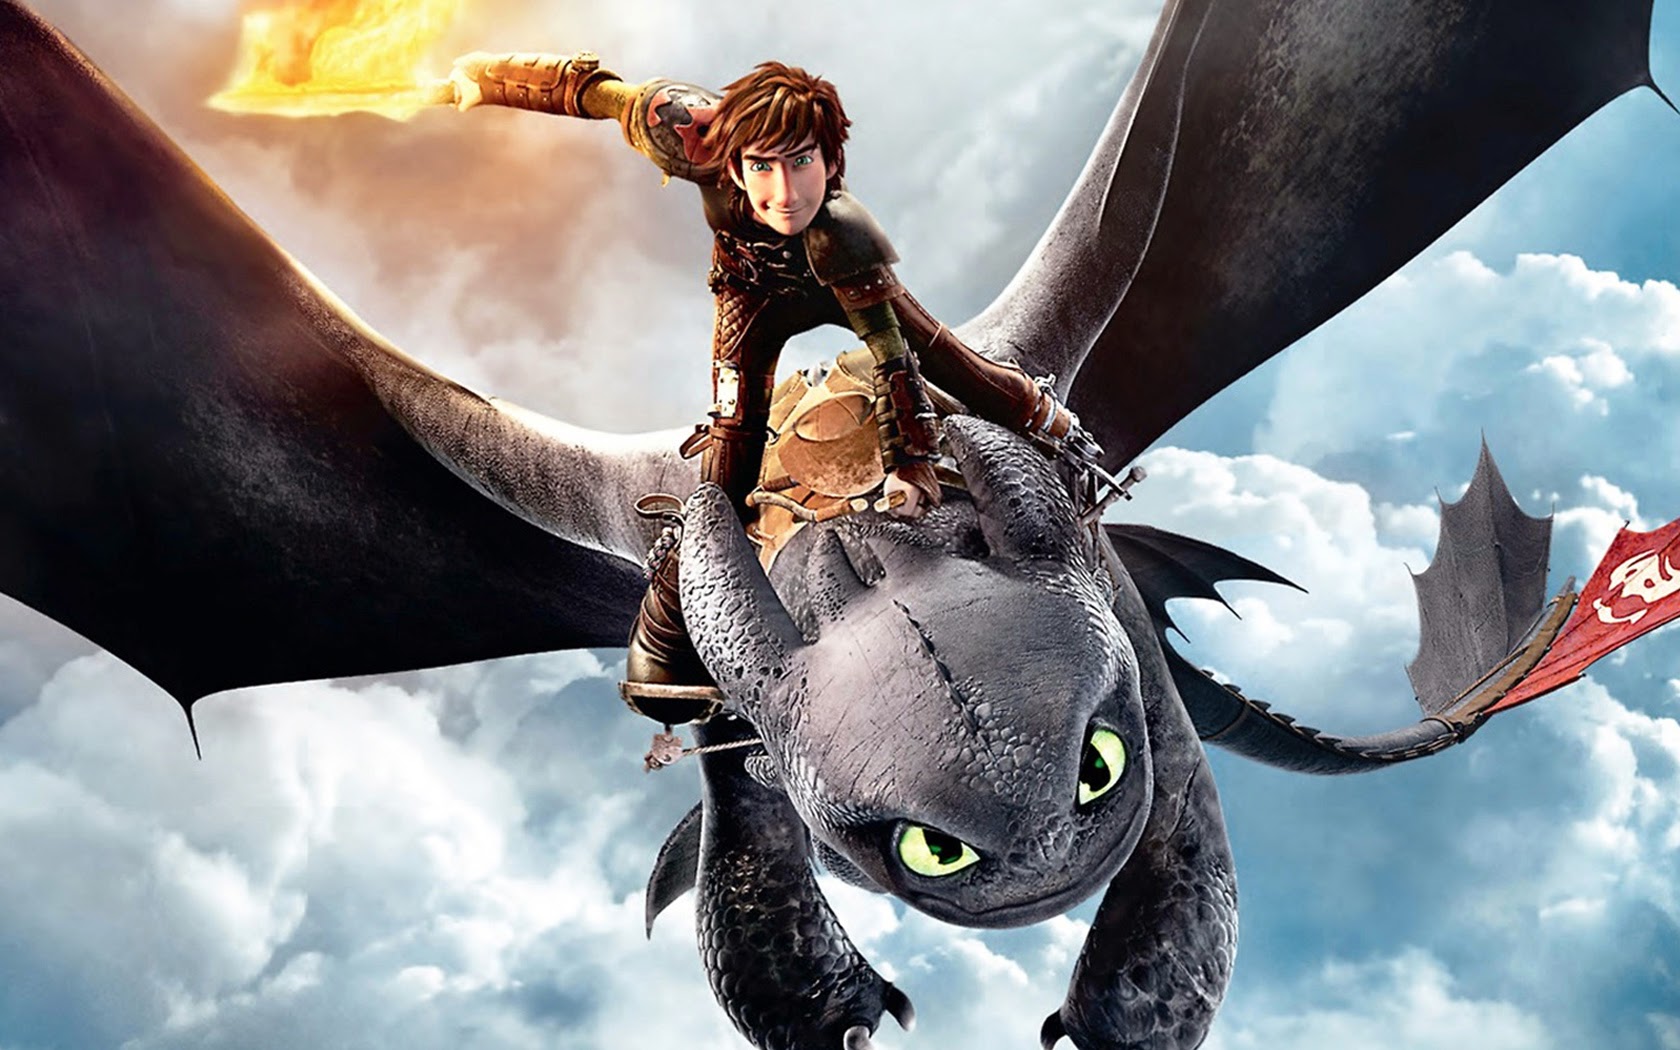 How to train your dragon wallpaper hd 3 - High Definition